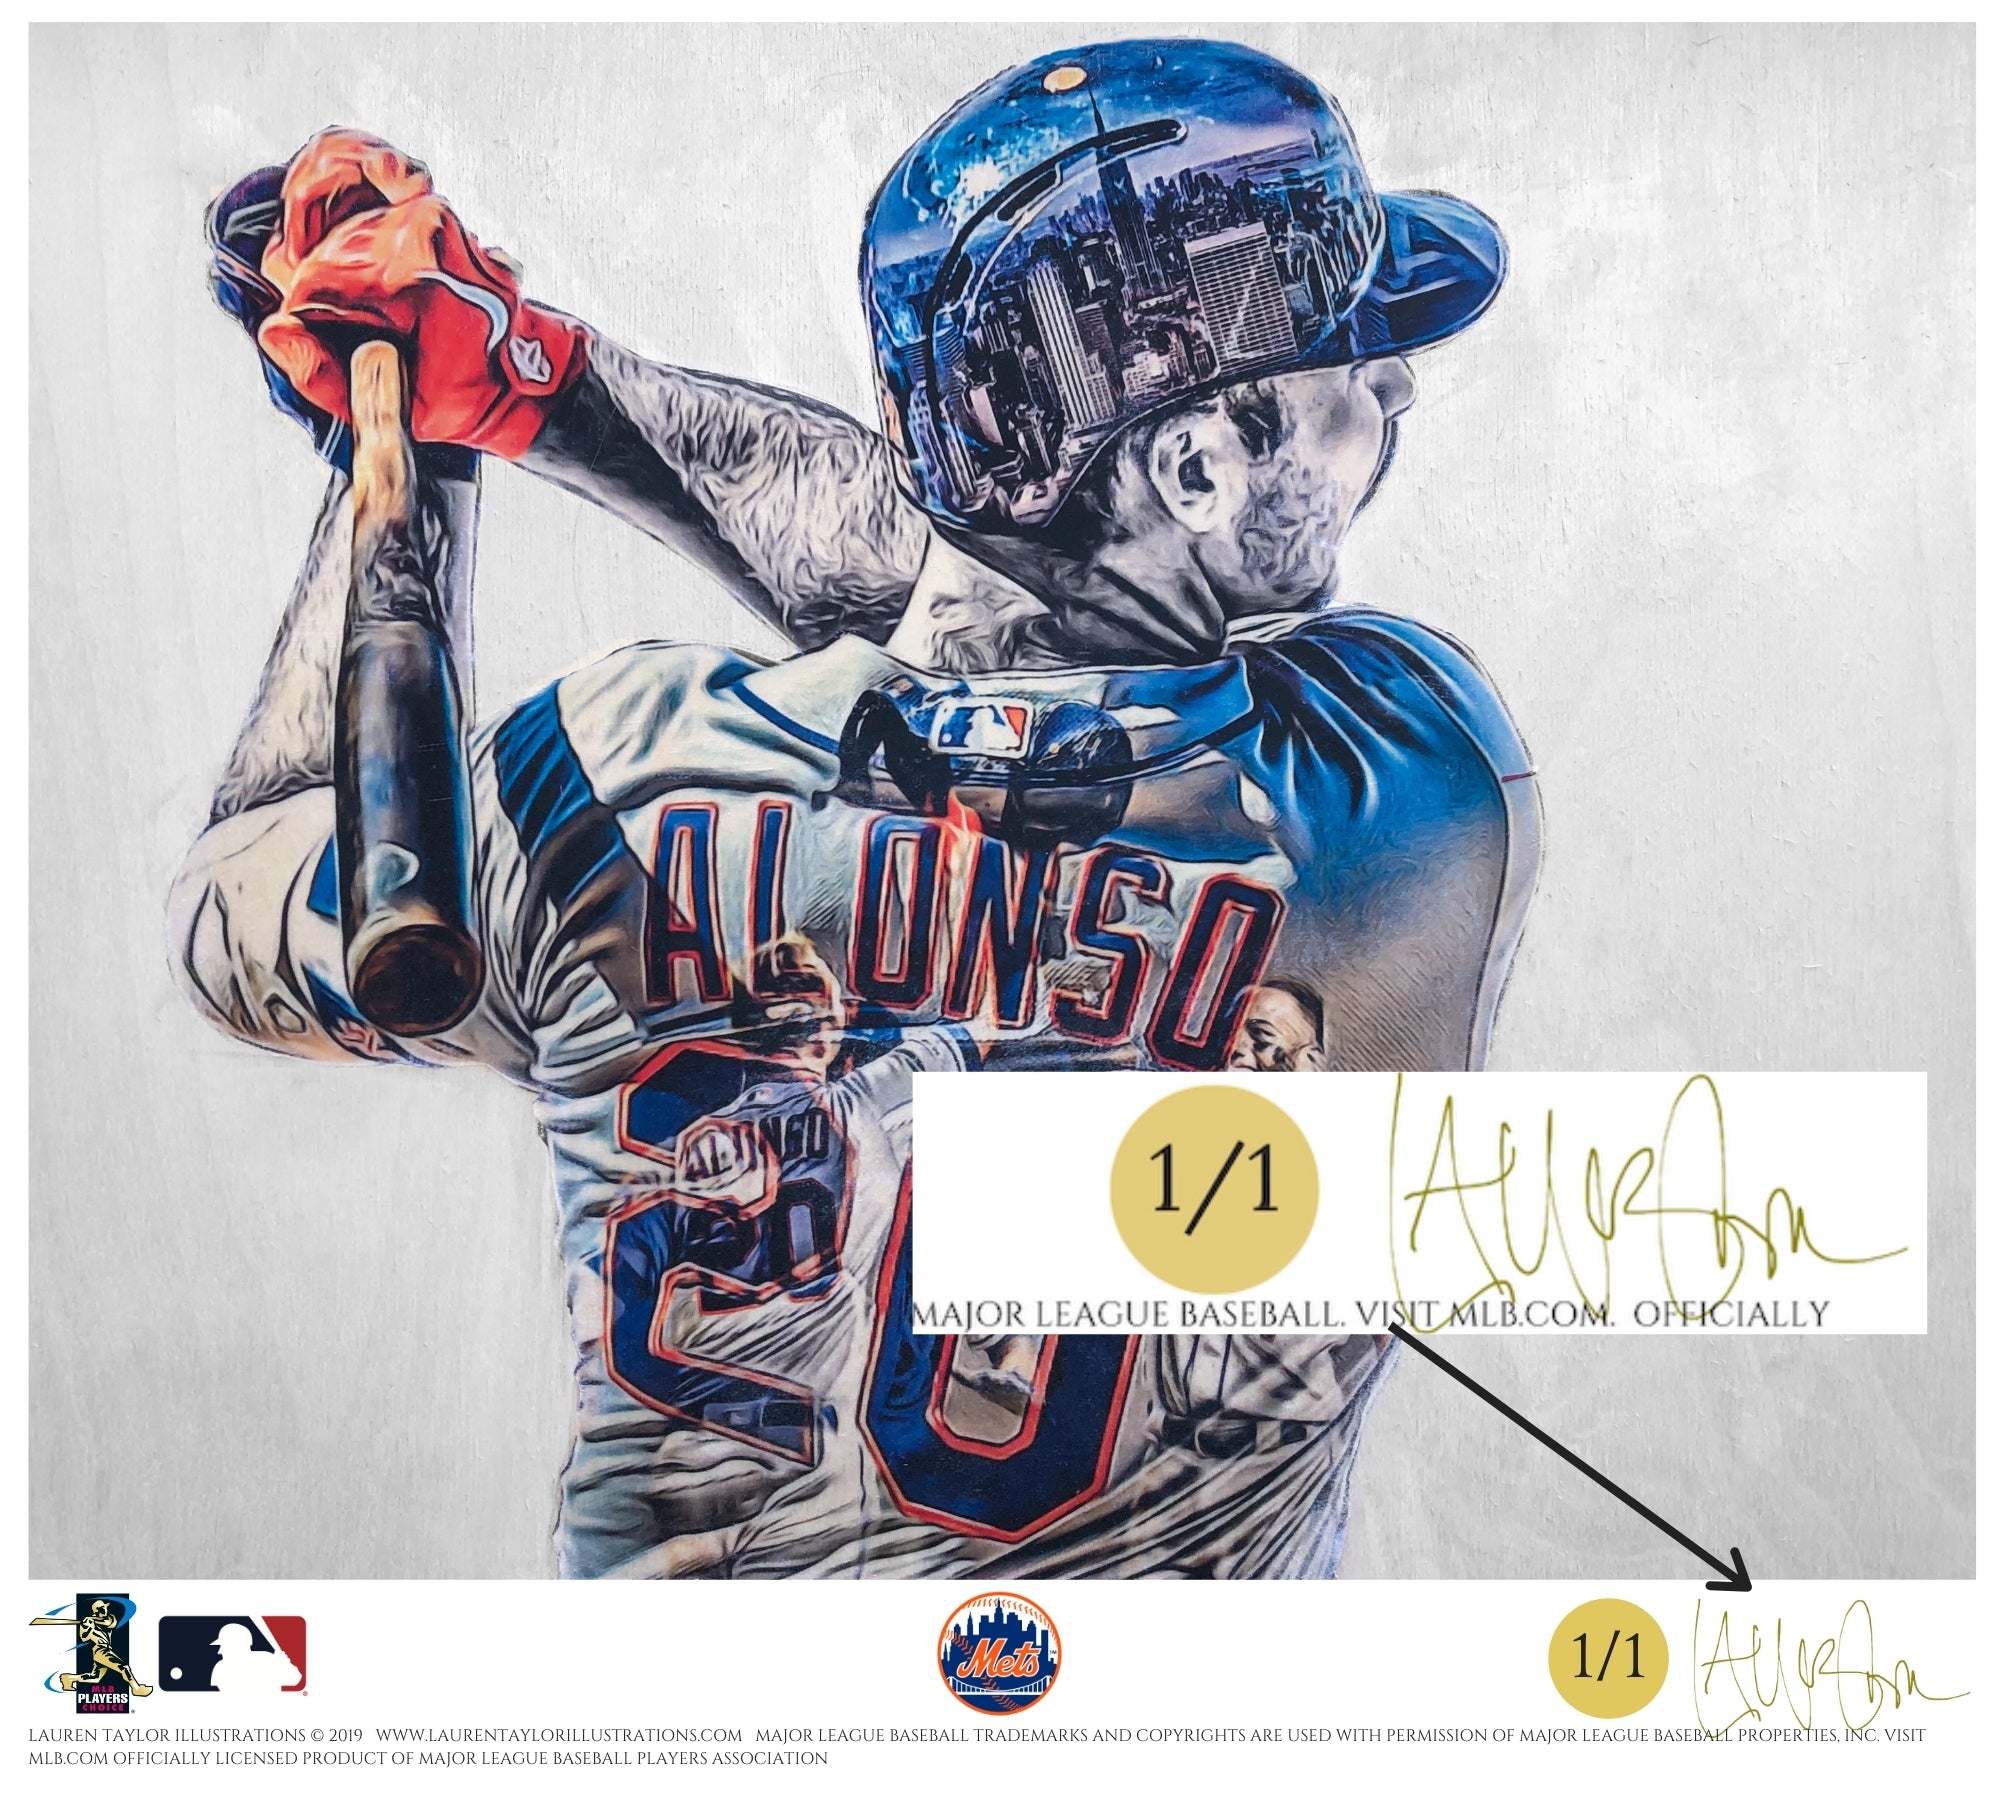 "Polar Bear" (Pete Alonso) New York Mets - Officially Licensed MLB Print - GOLD ARTIST SIGNATURE Limited Release /1